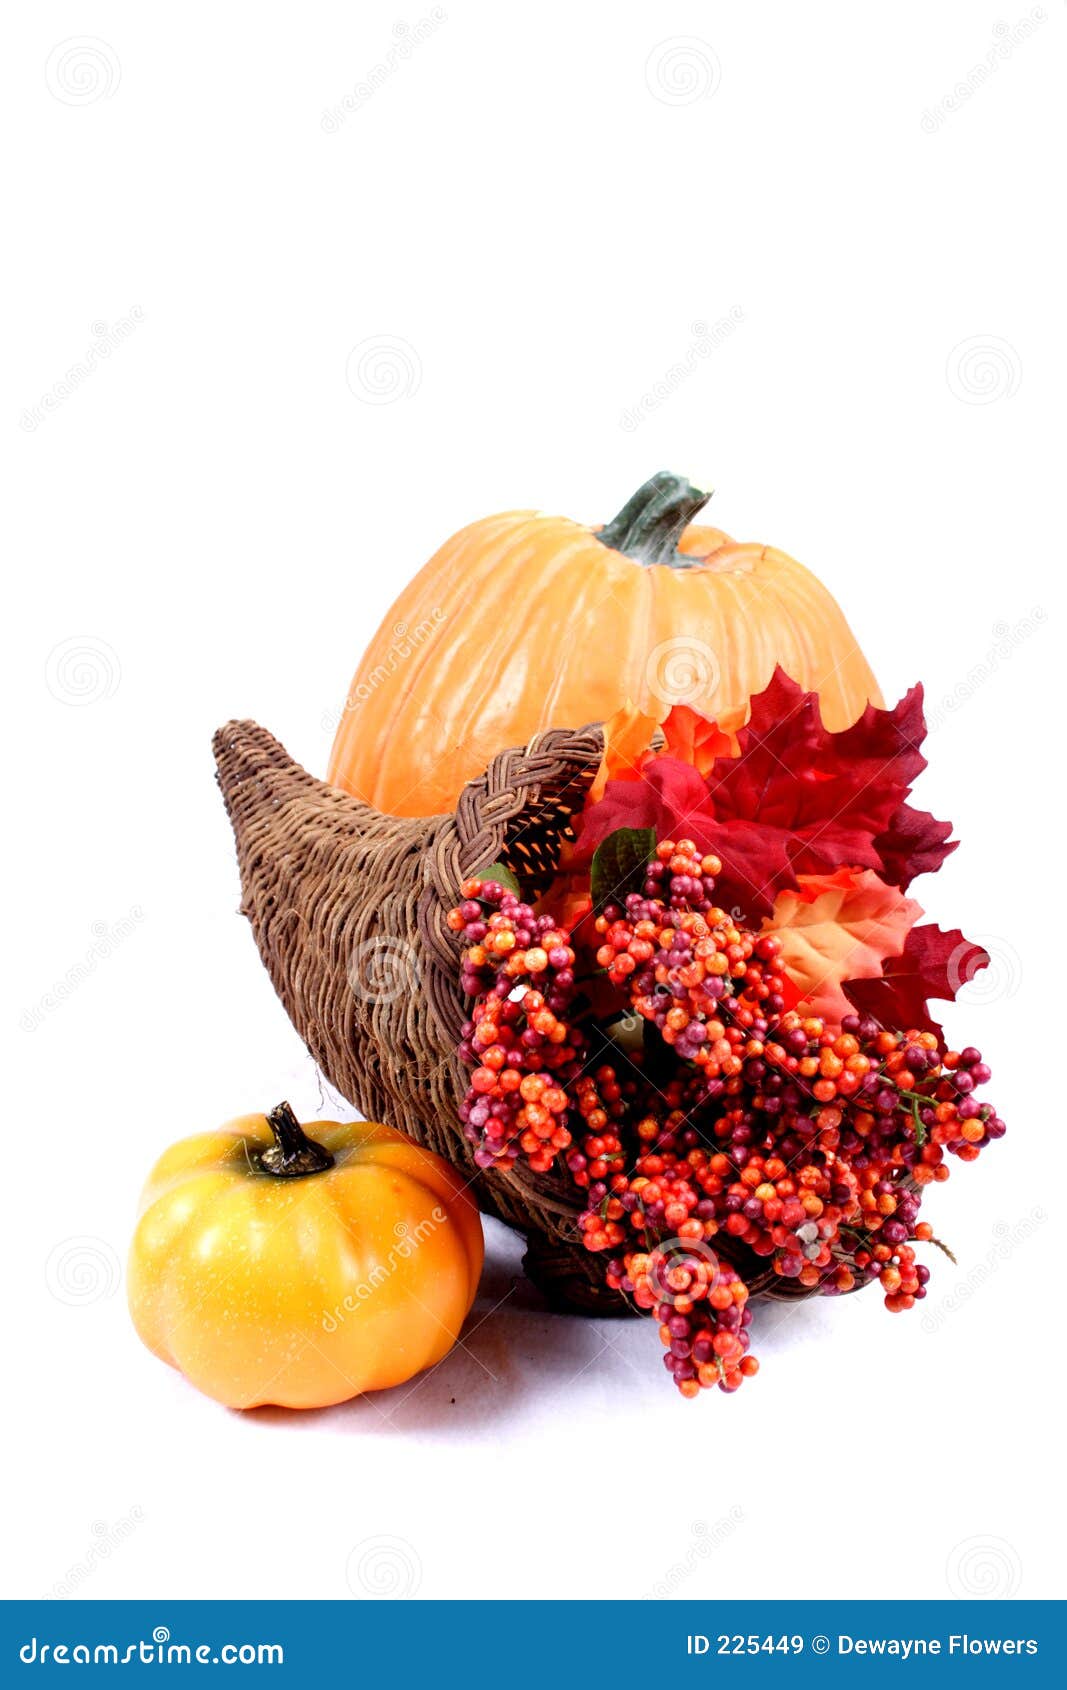 Fall - Thanksgiving Decorations Stock Image - Image of autumn, cold: 225449